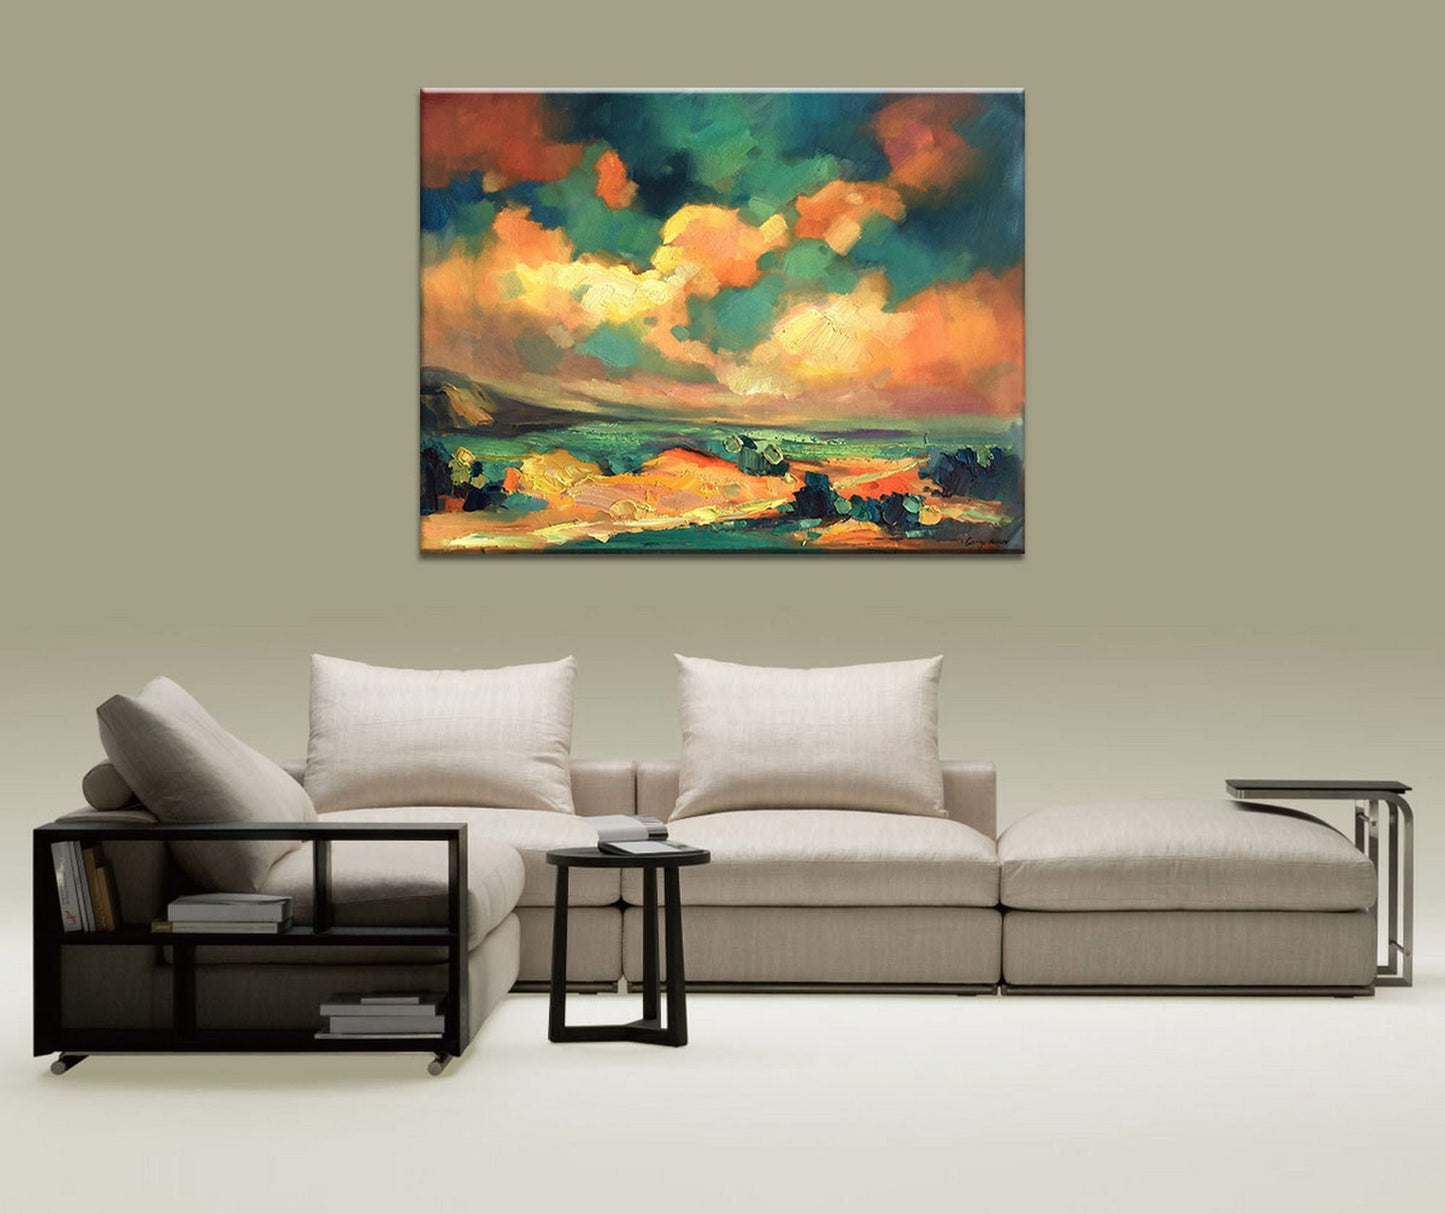 Large Abstract Landscape Painting, Abstract Oil Painting, Original Oil Painting Landscape, Wall Art, Wall Decor, Oil Painting Original